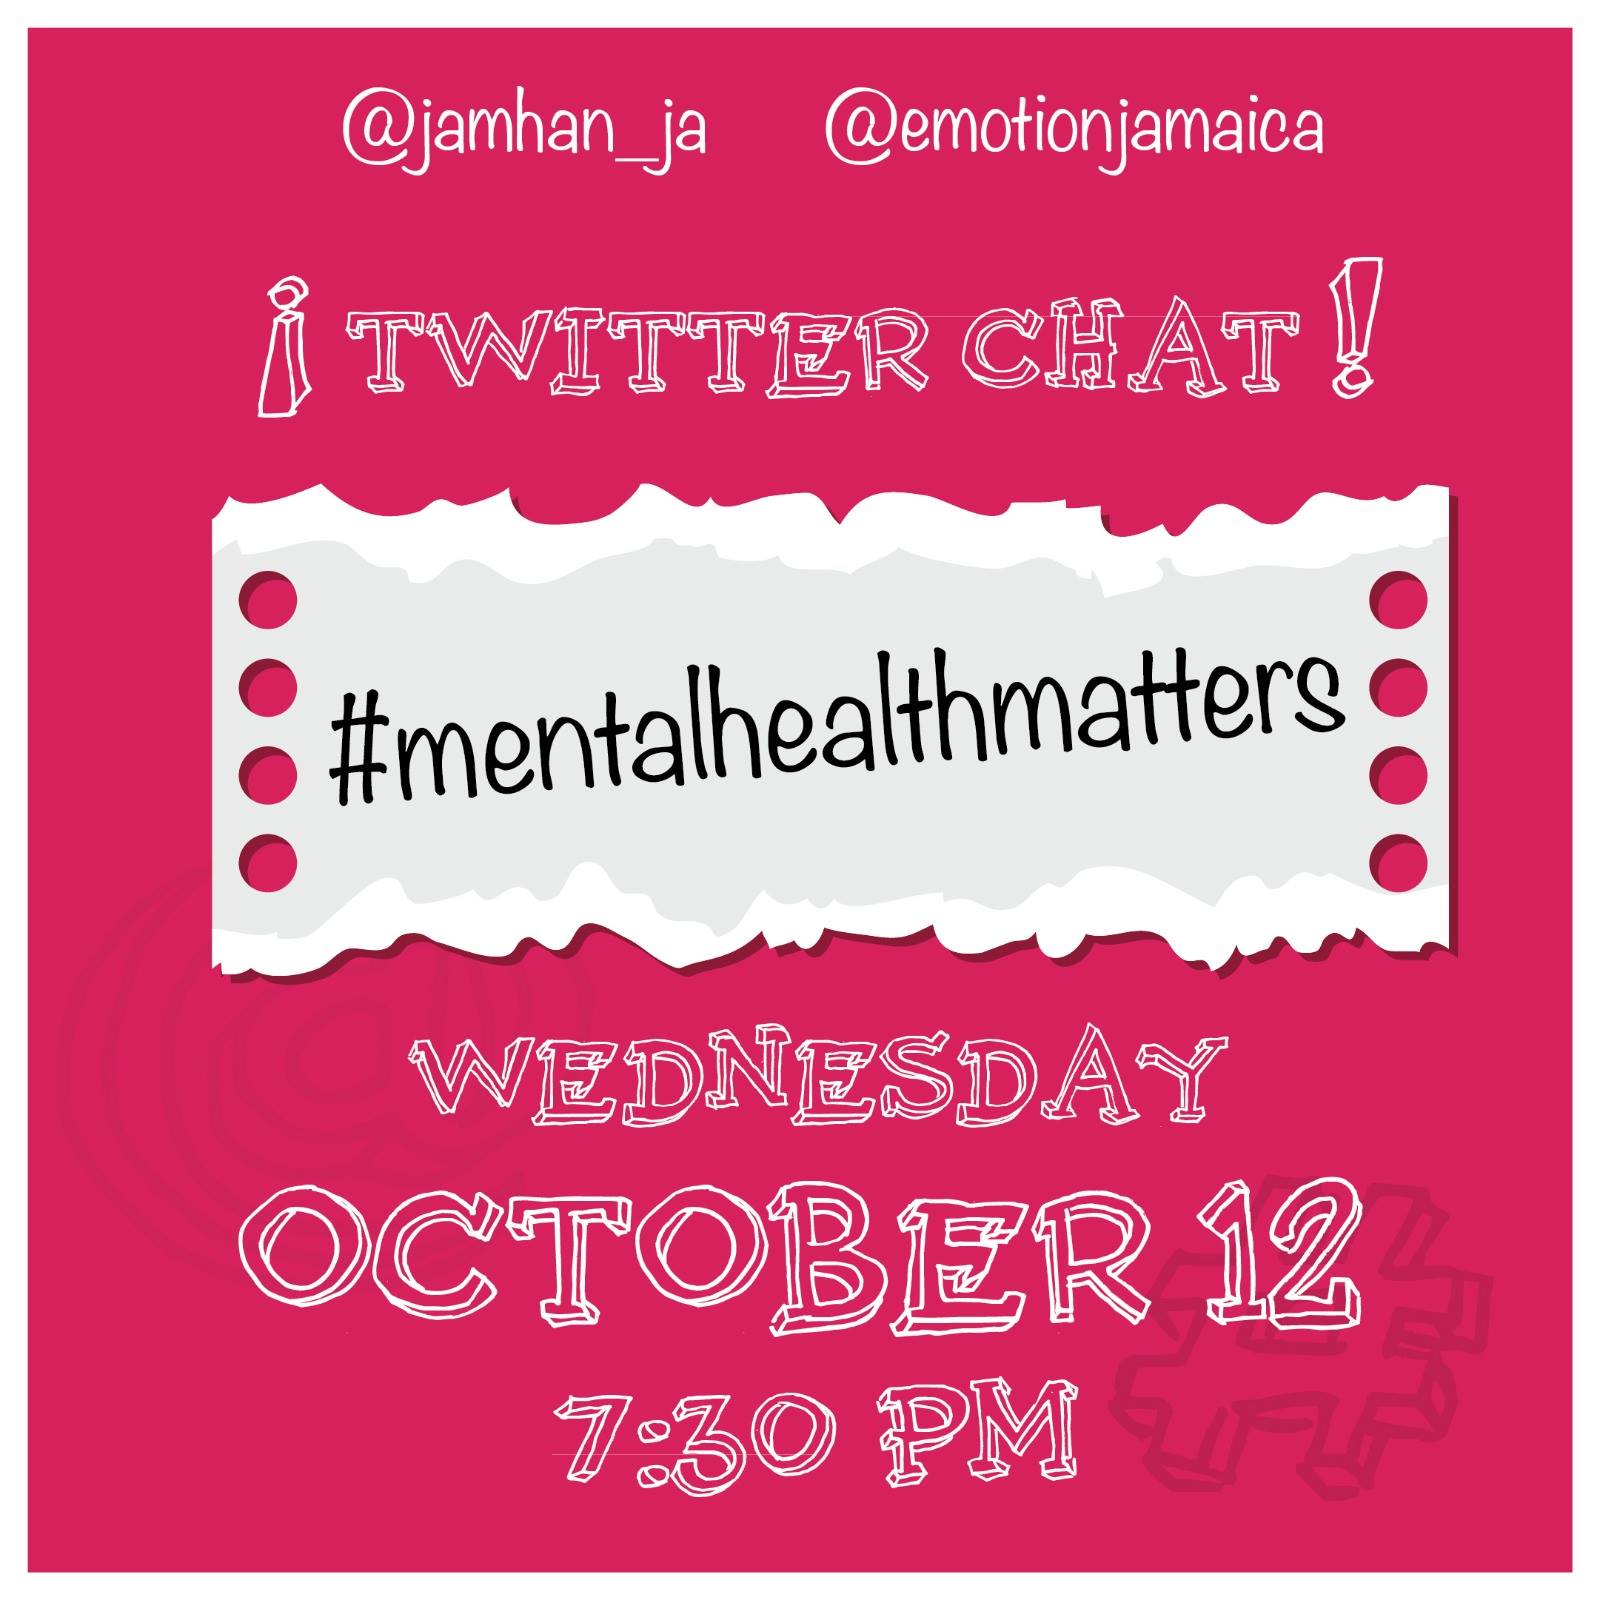 twitter-chat-with-emotion-jamhan-mhaw16